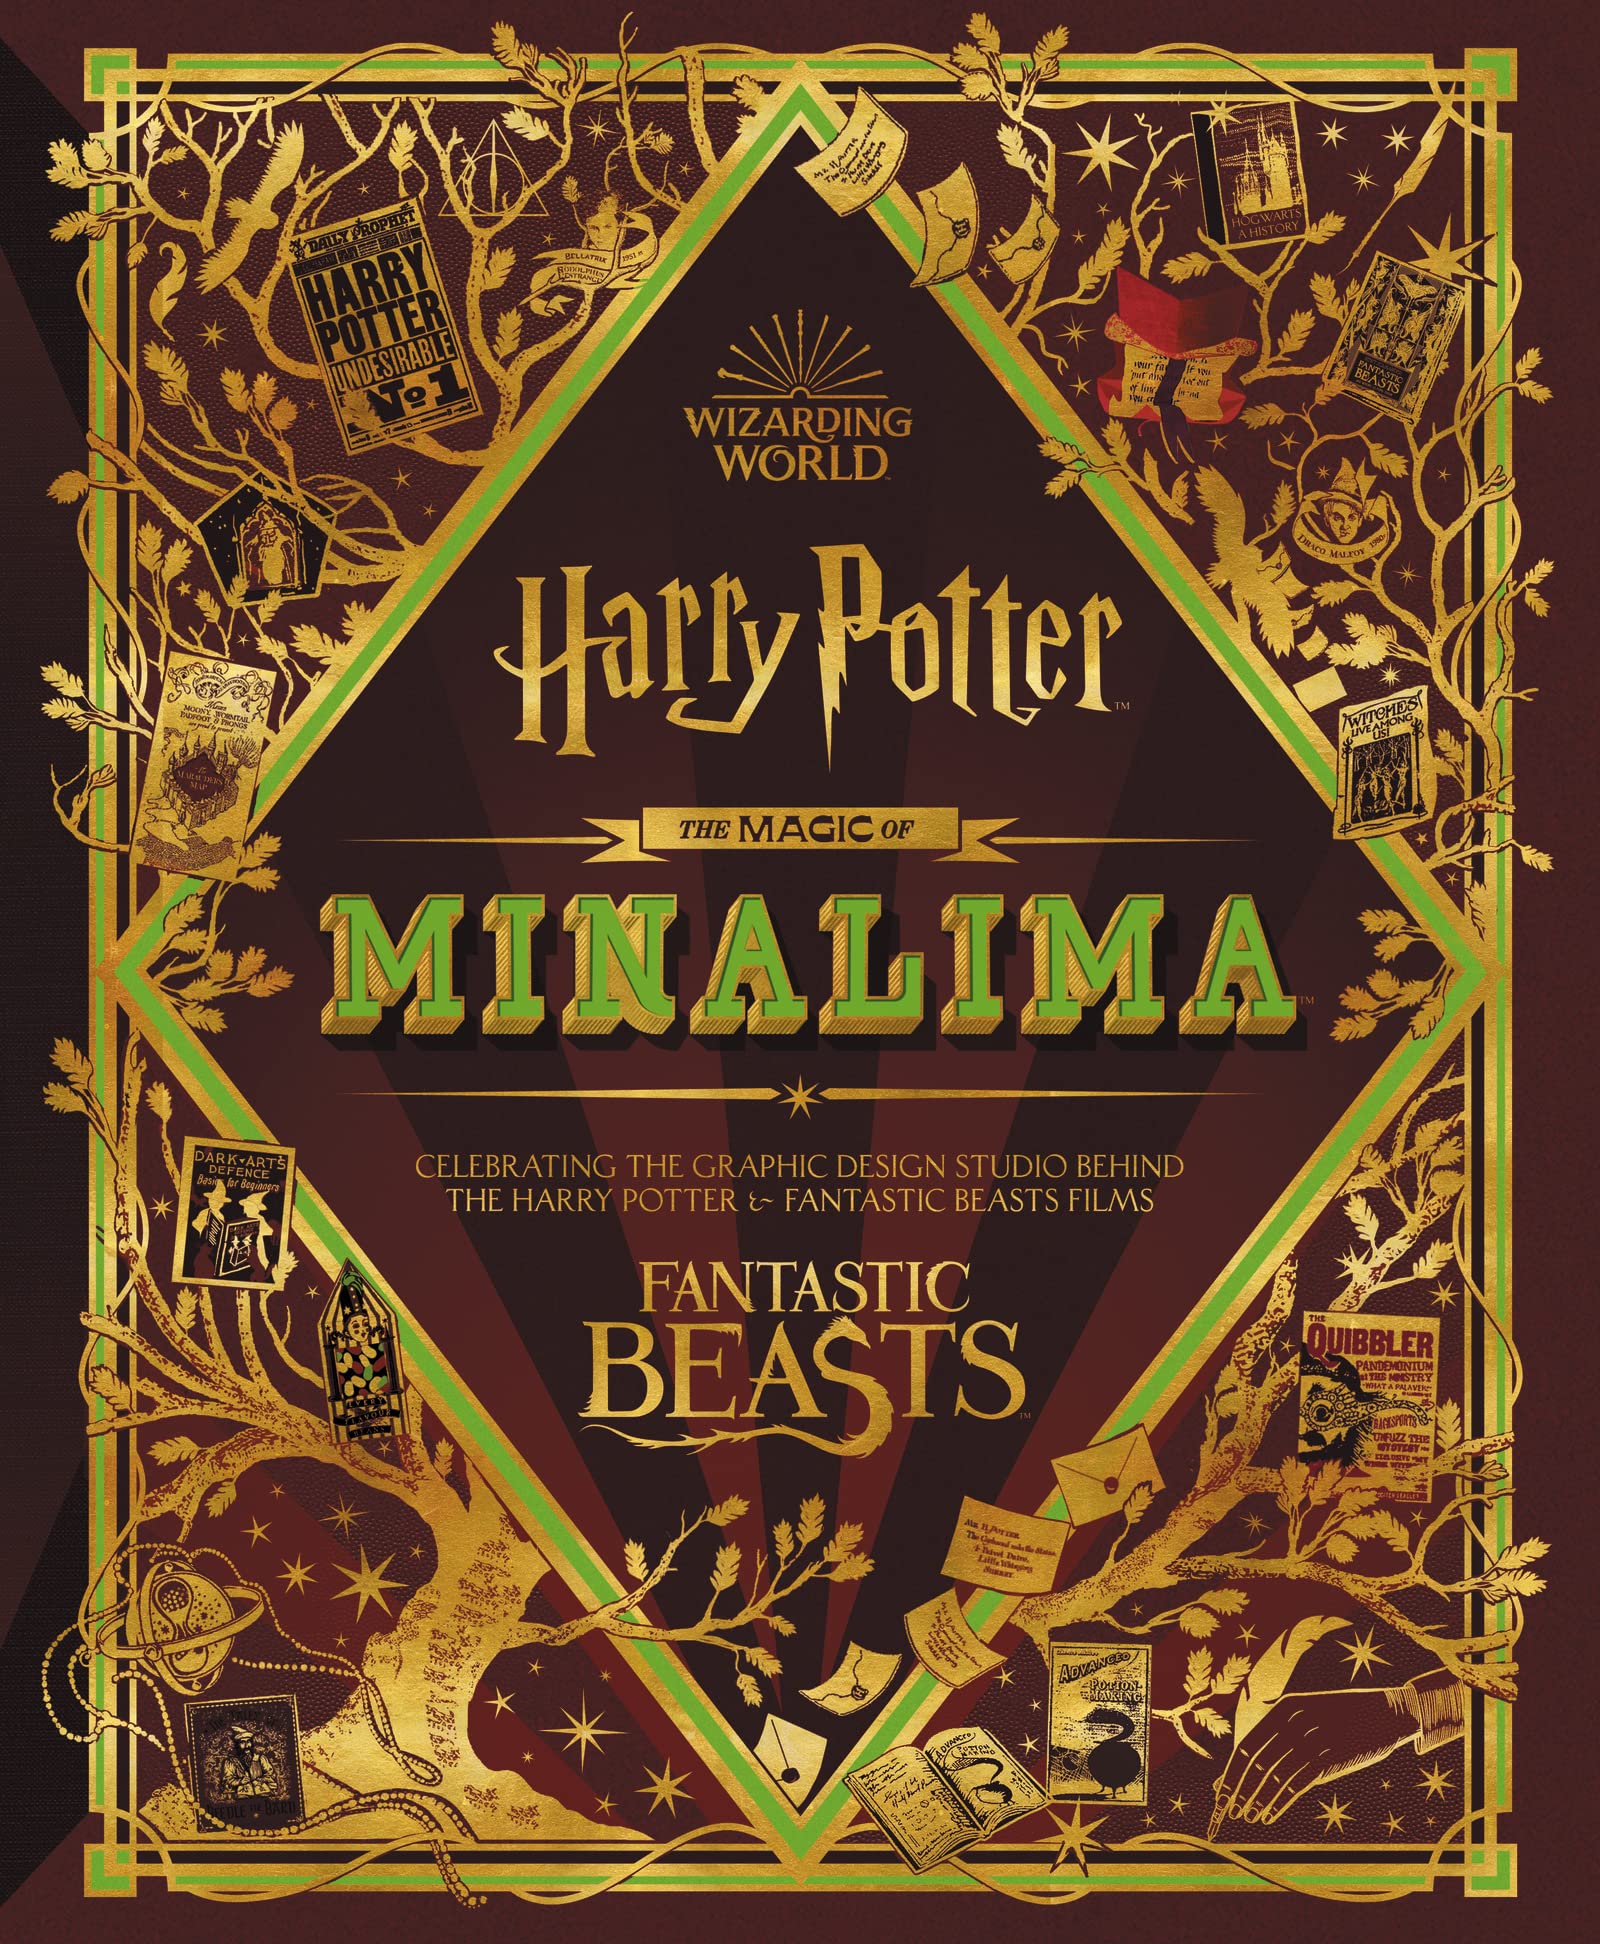 The Magic of Minalima: Celebrating the Graphic Design Studio Behind the Harry Potter & Fantastic Beasts Films (Hardcover)